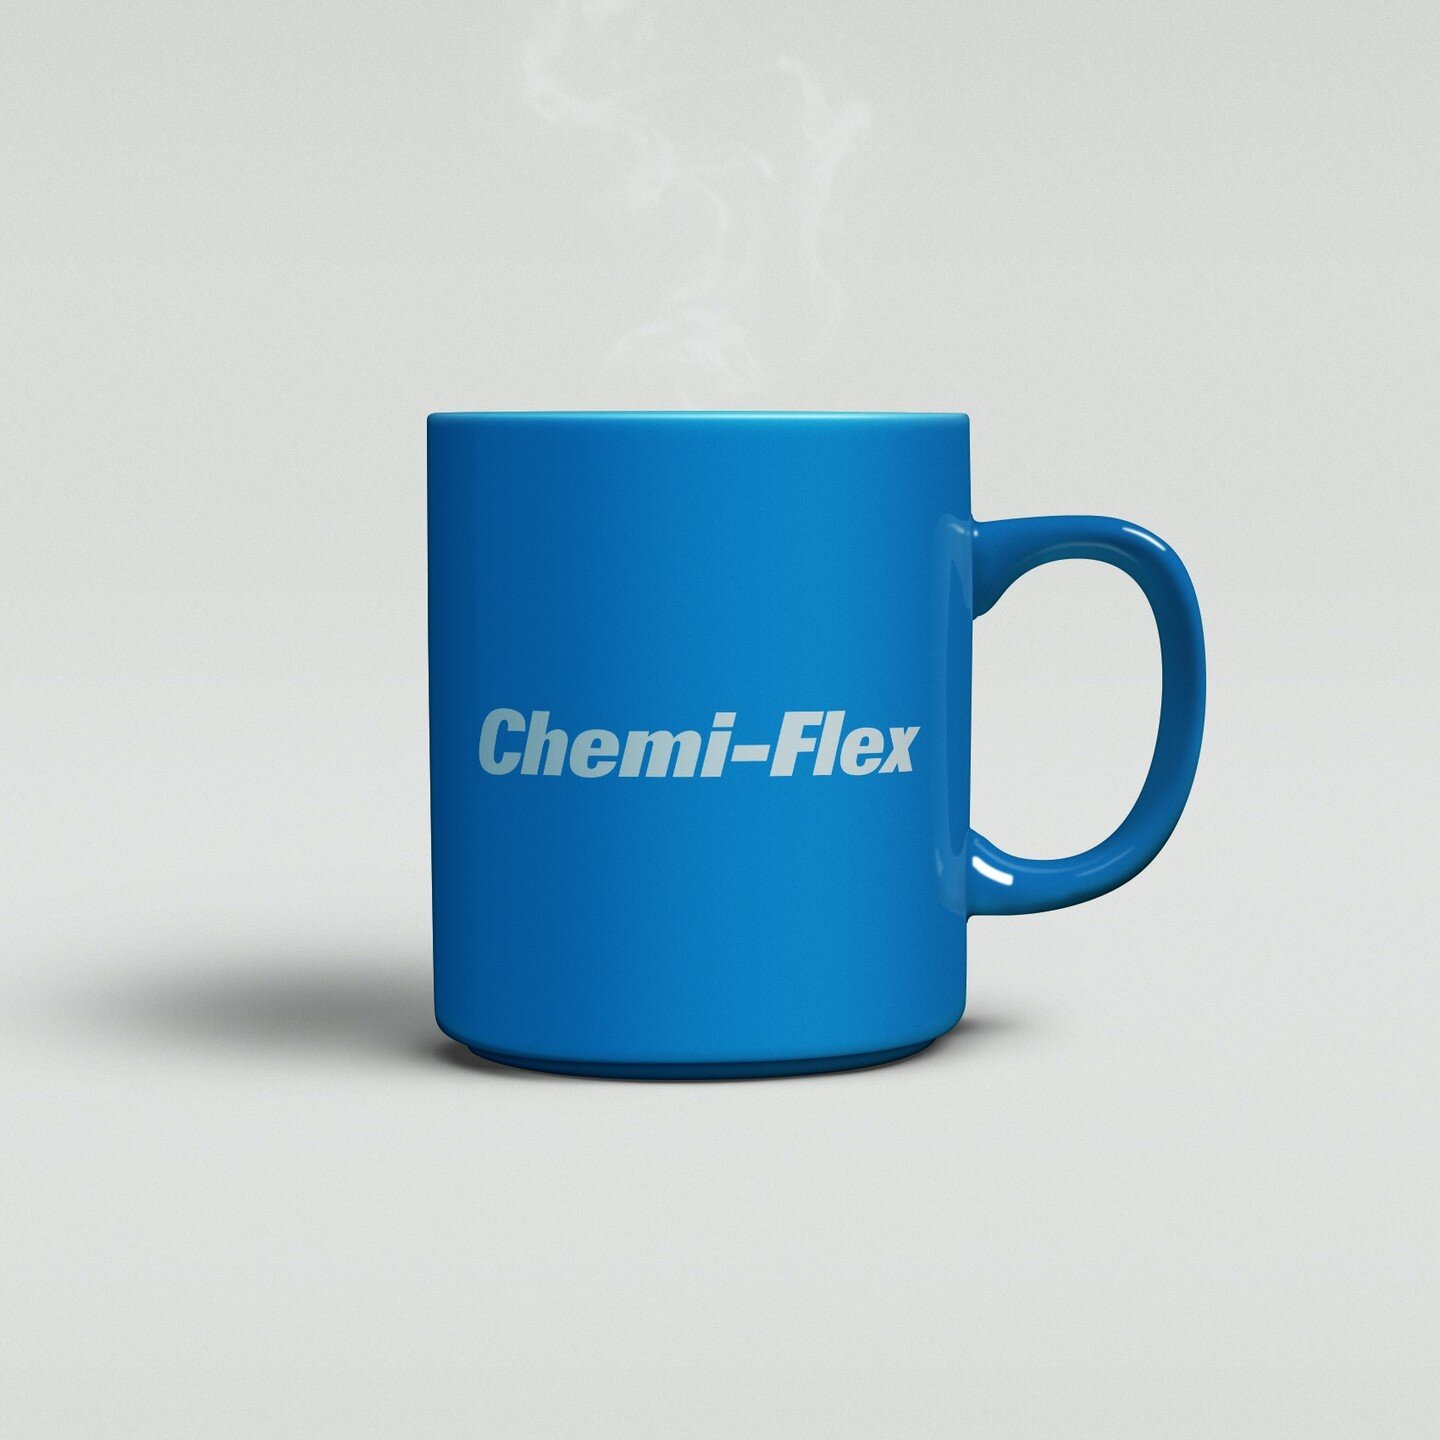 Chemi-Flex specializes in offering truly innovative belting concepts with our standard timing belts and custom belting with molded backside profiles.

#chemiflex #polyurethanebelts